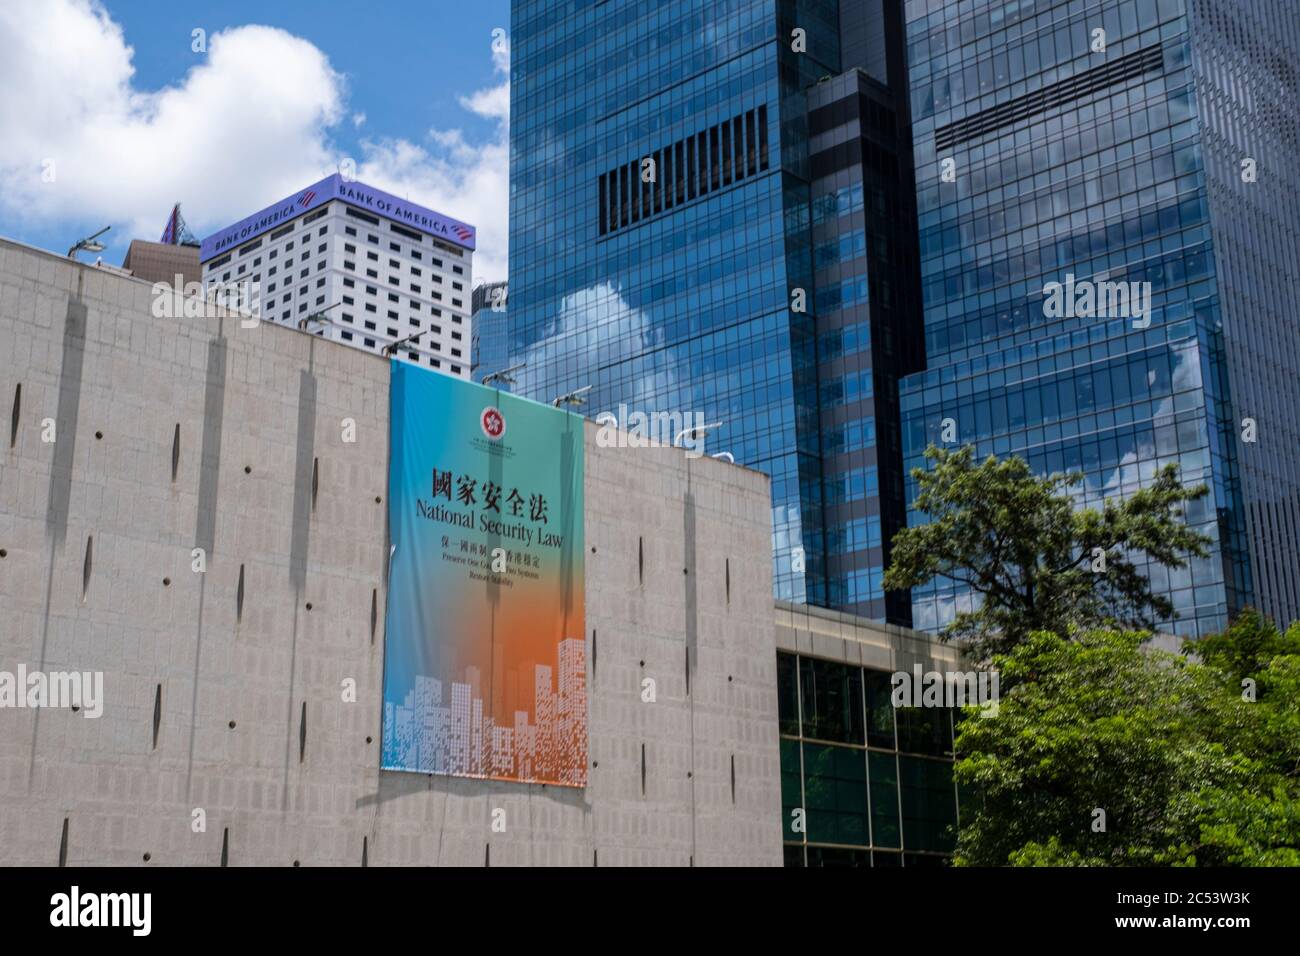 Hong Kong, Hong Kong. 30th June, 2020. A government sponsored advertisement promoting the new national security law display on a building in Hong Kong. Credit: Chan Long Hei/SOPA Images/ZUMA Wire/Alamy Live News Stock Photo